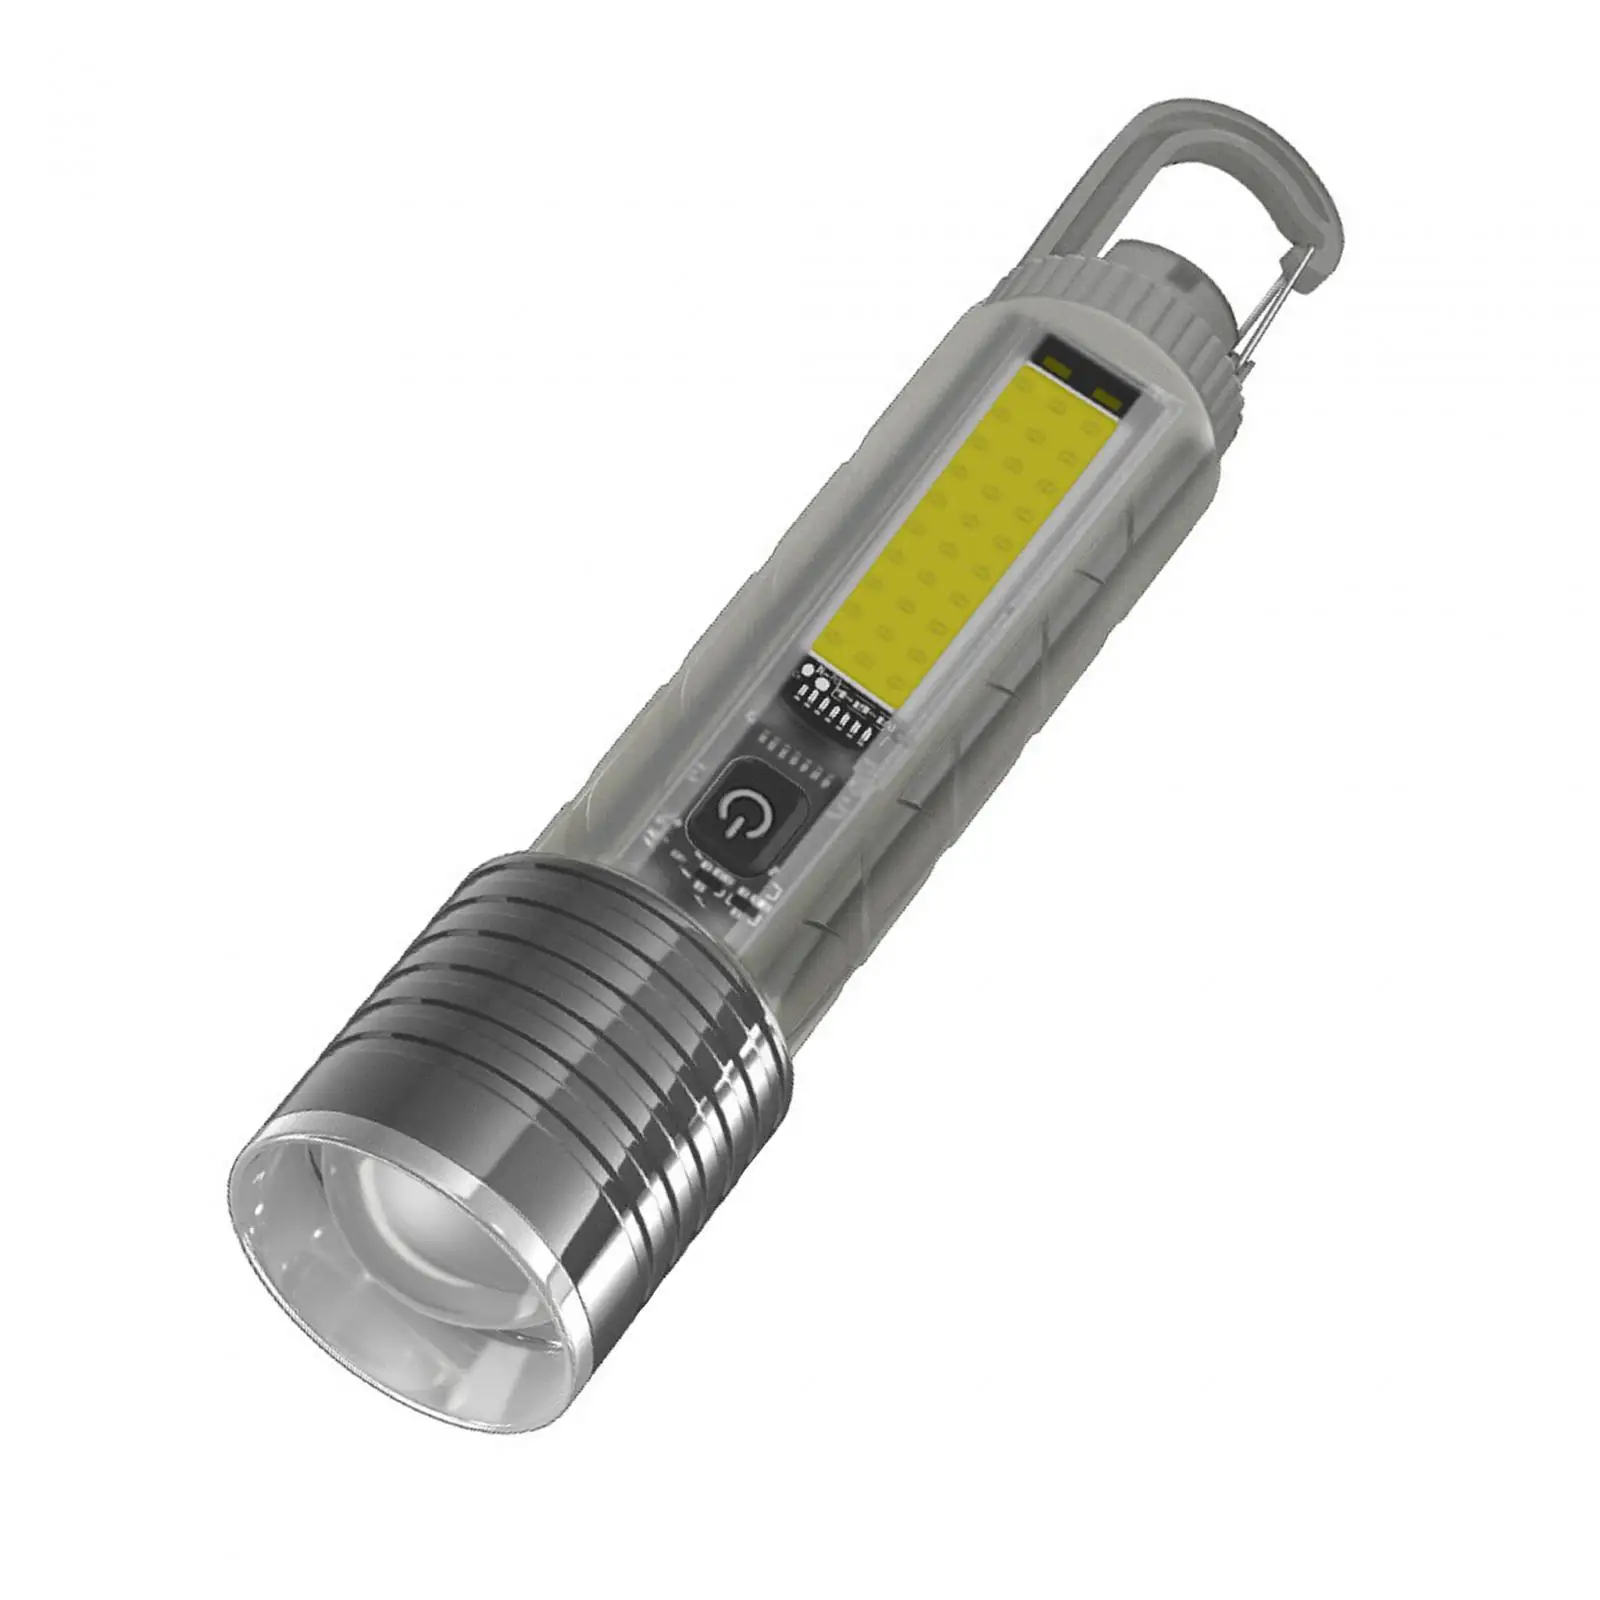 LED Flashlight COB Portable Outdoor Adjustable Lightweight Torch for Running Walking Hiking Auto Maintenance Camping